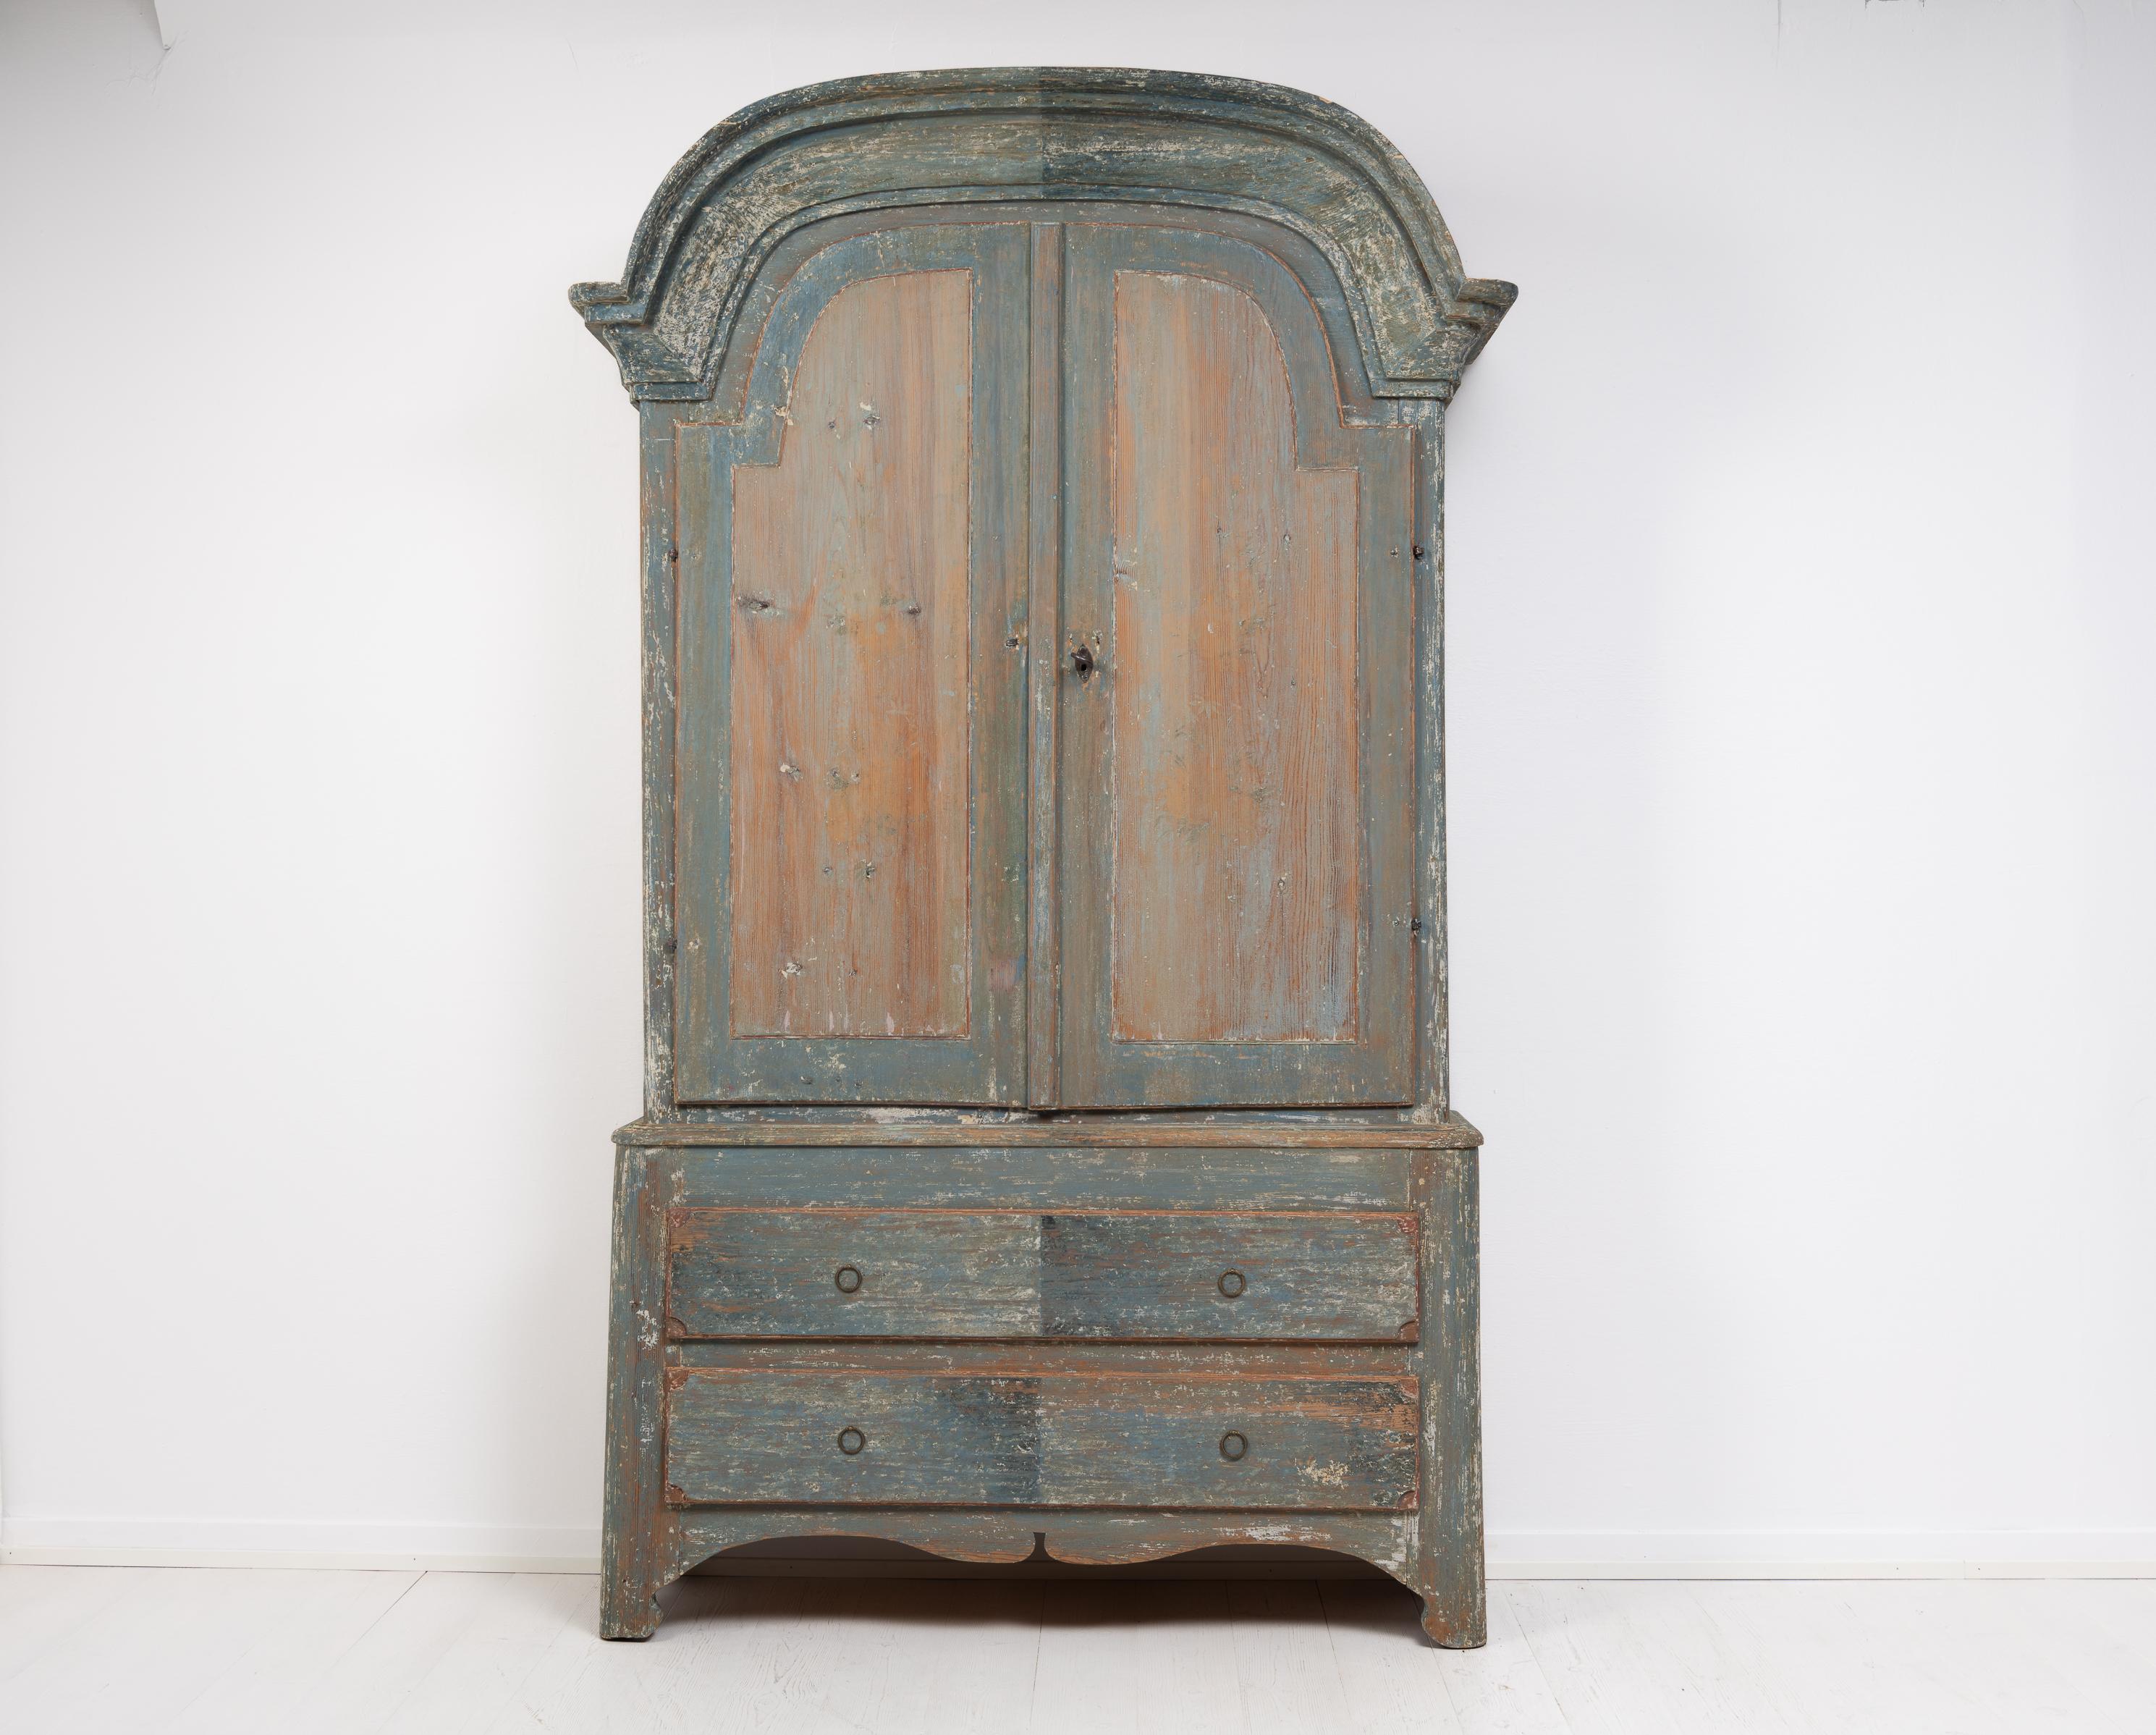 Rare Swedish rococo country cabinet in painted pine. The cabinet is a classic country house furniture from northern Sweden. Made during the late 18th century, circa 1790, during the rococo period. The cabinet is made in two parts and has a healthy